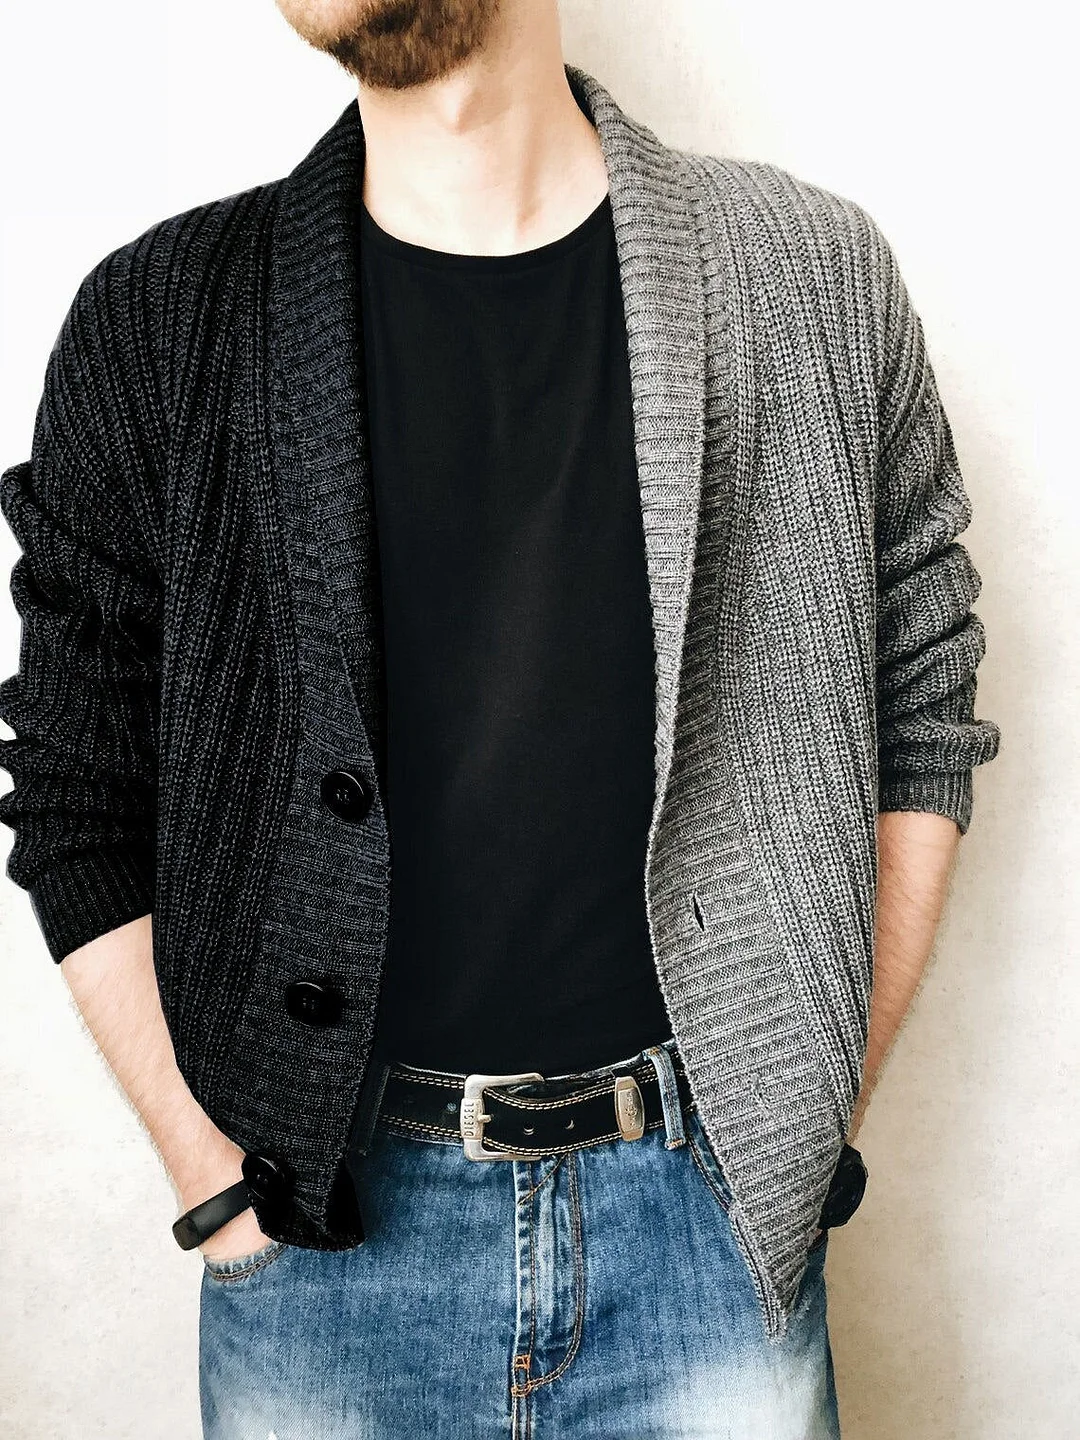 Men's new autumn two-color mosaic V-neck cardigan sweater loose large sweater clothes Green gray sweaters for wool coat S-3XL